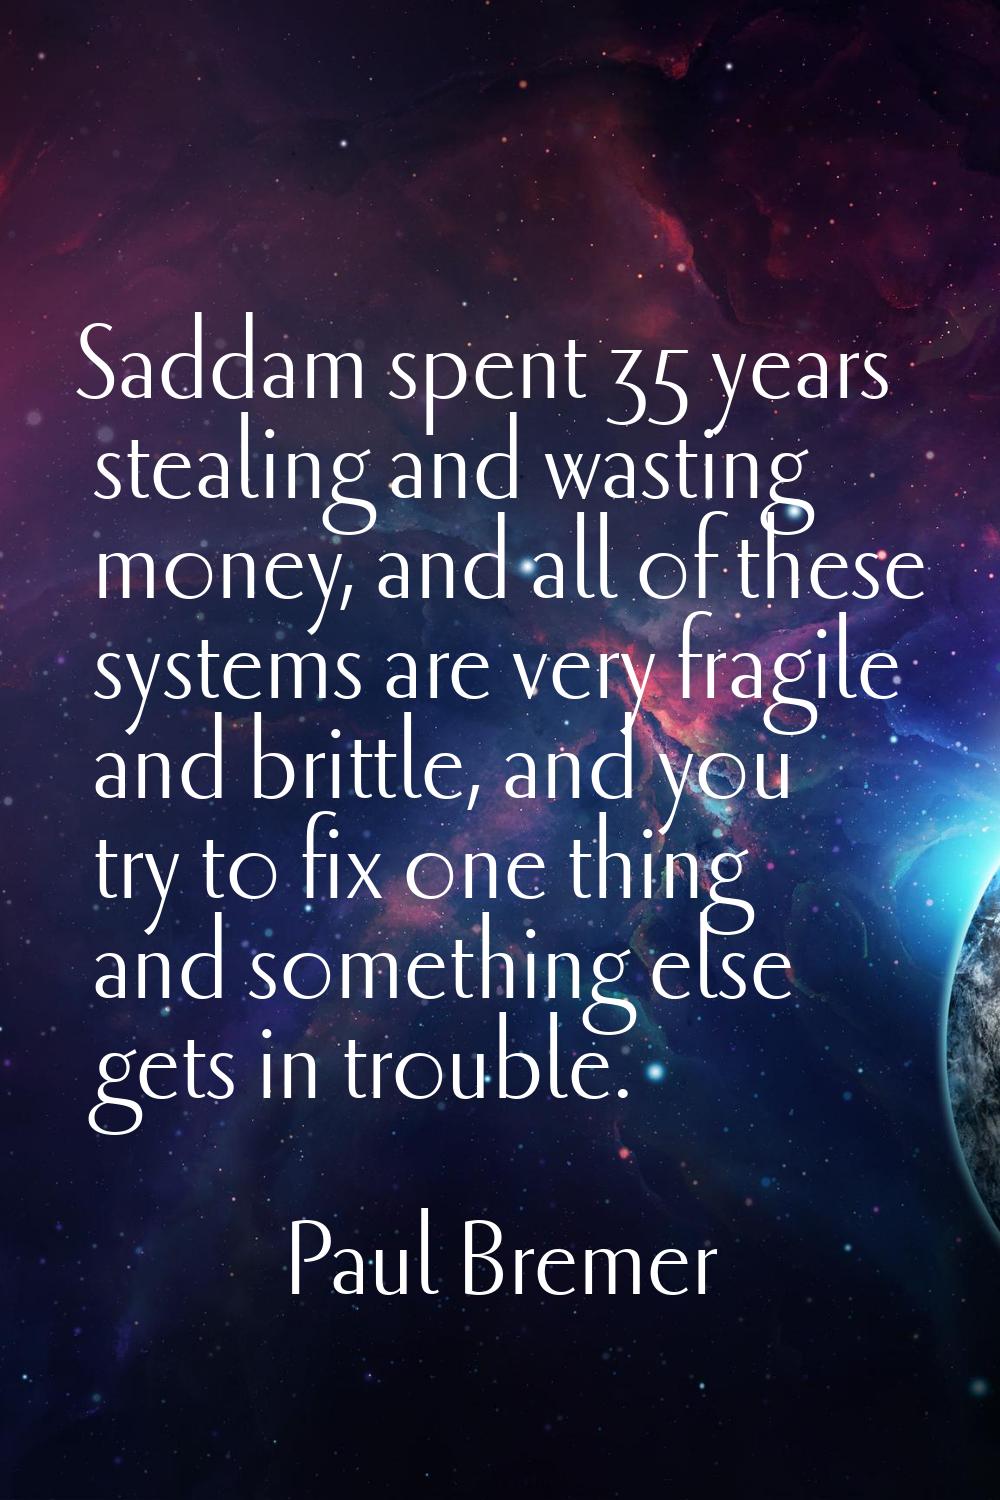 Saddam spent 35 years stealing and wasting money, and all of these systems are very fragile and bri